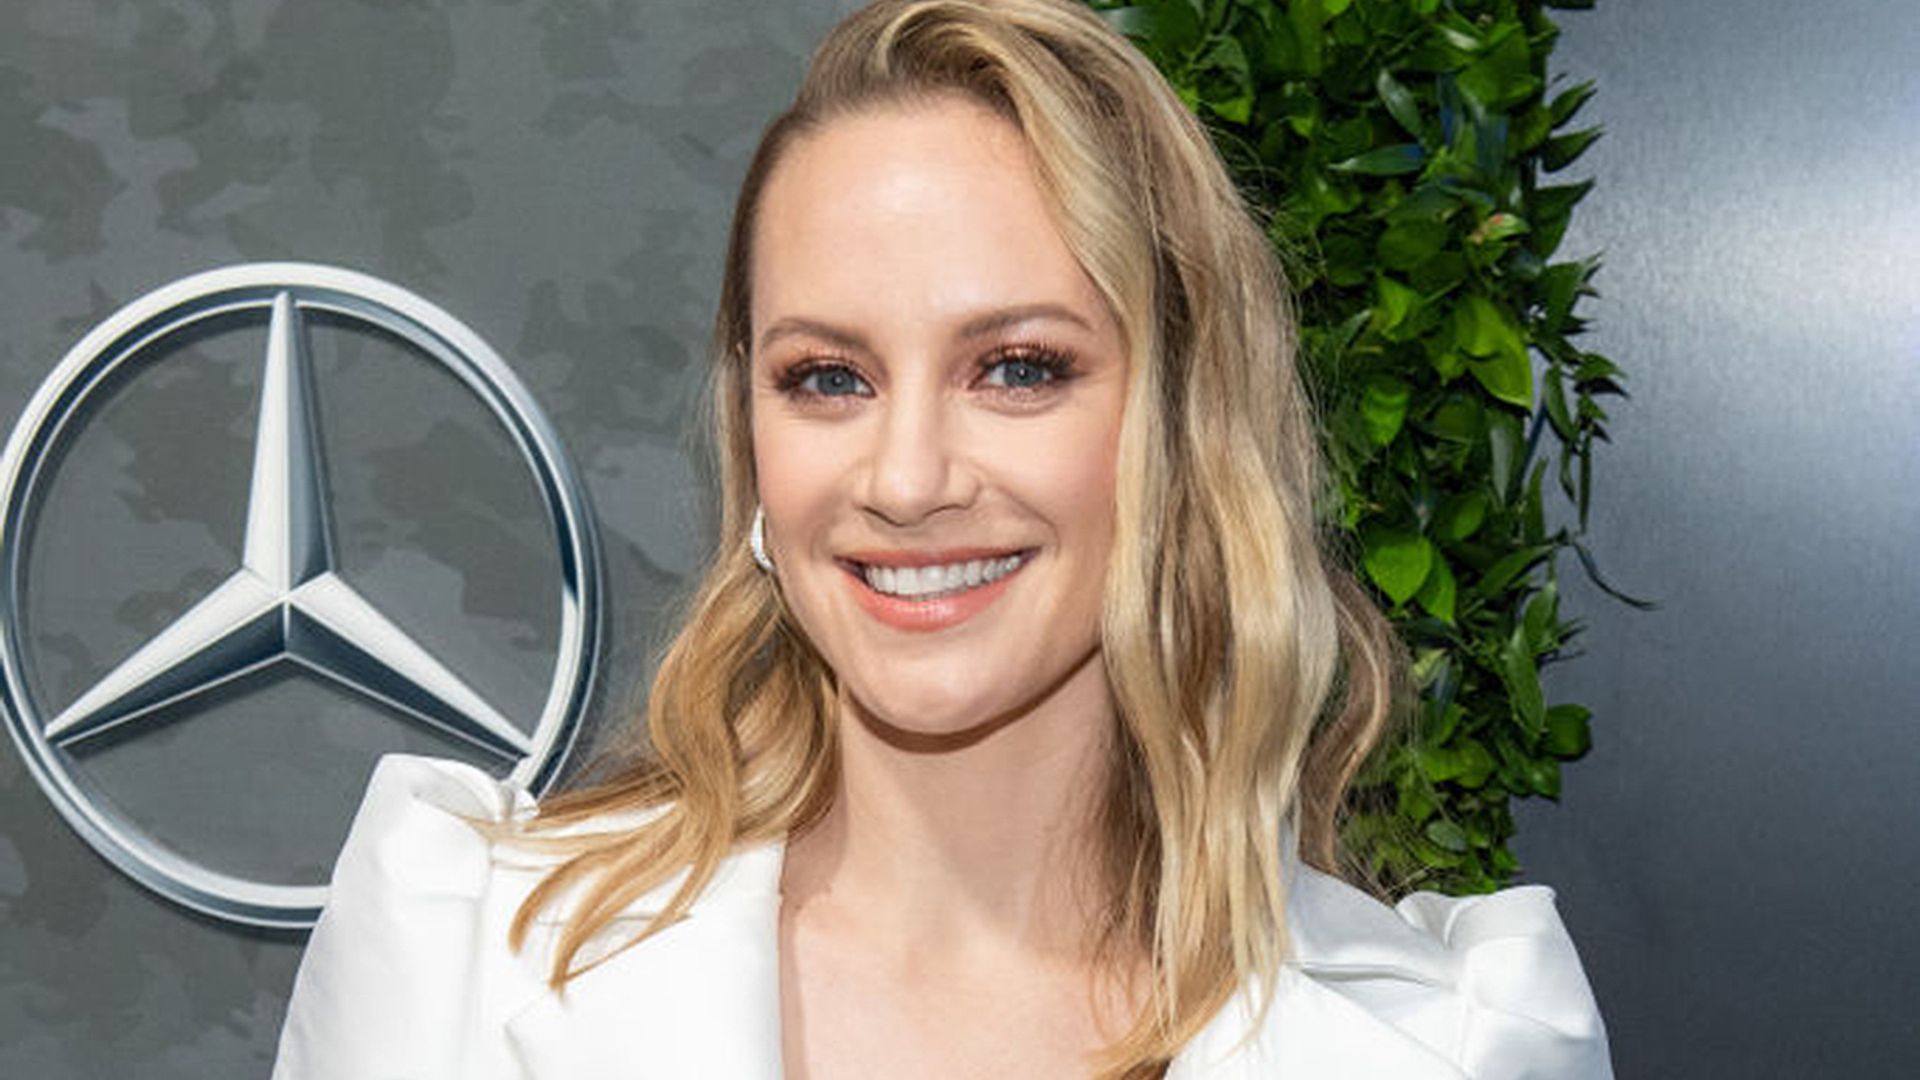 Who is Station 19 star Danielle Savre's partner? All the details